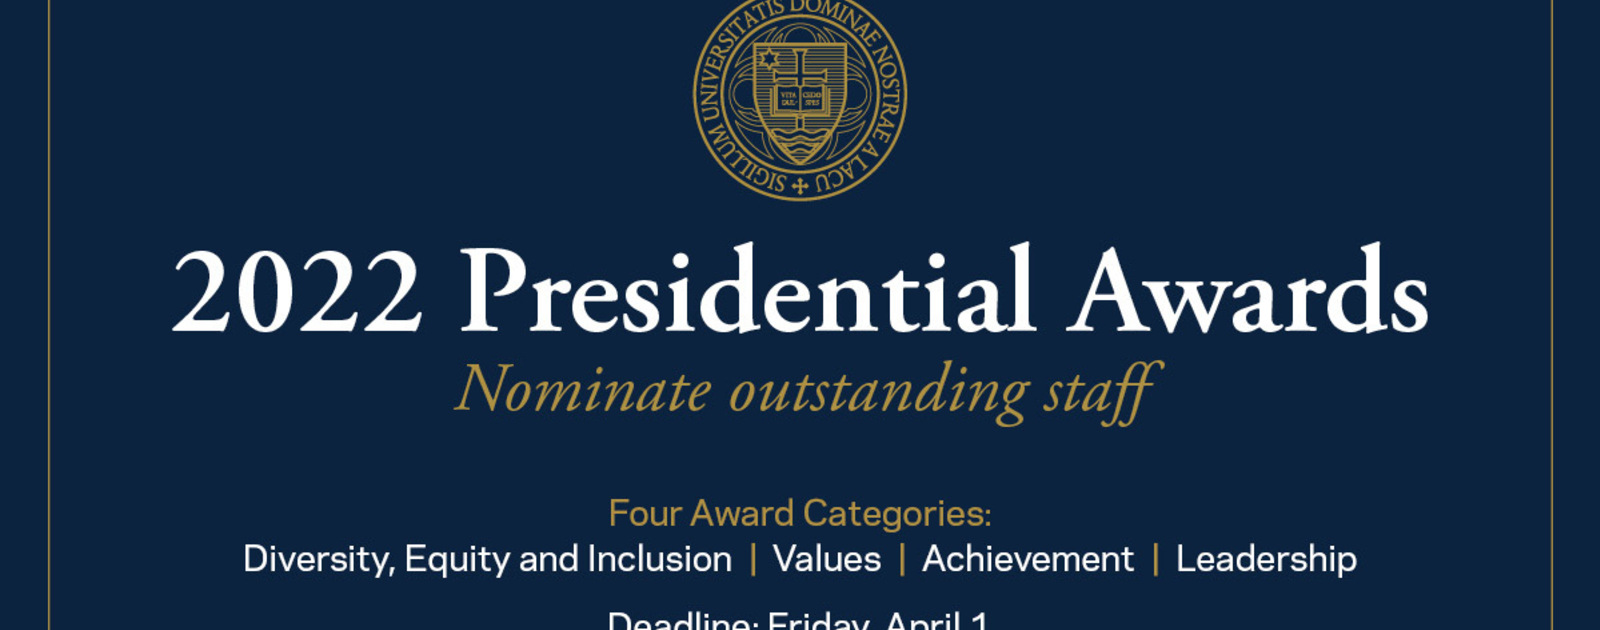 Call for Nominations 2022 Presidential Awards News WellBeing